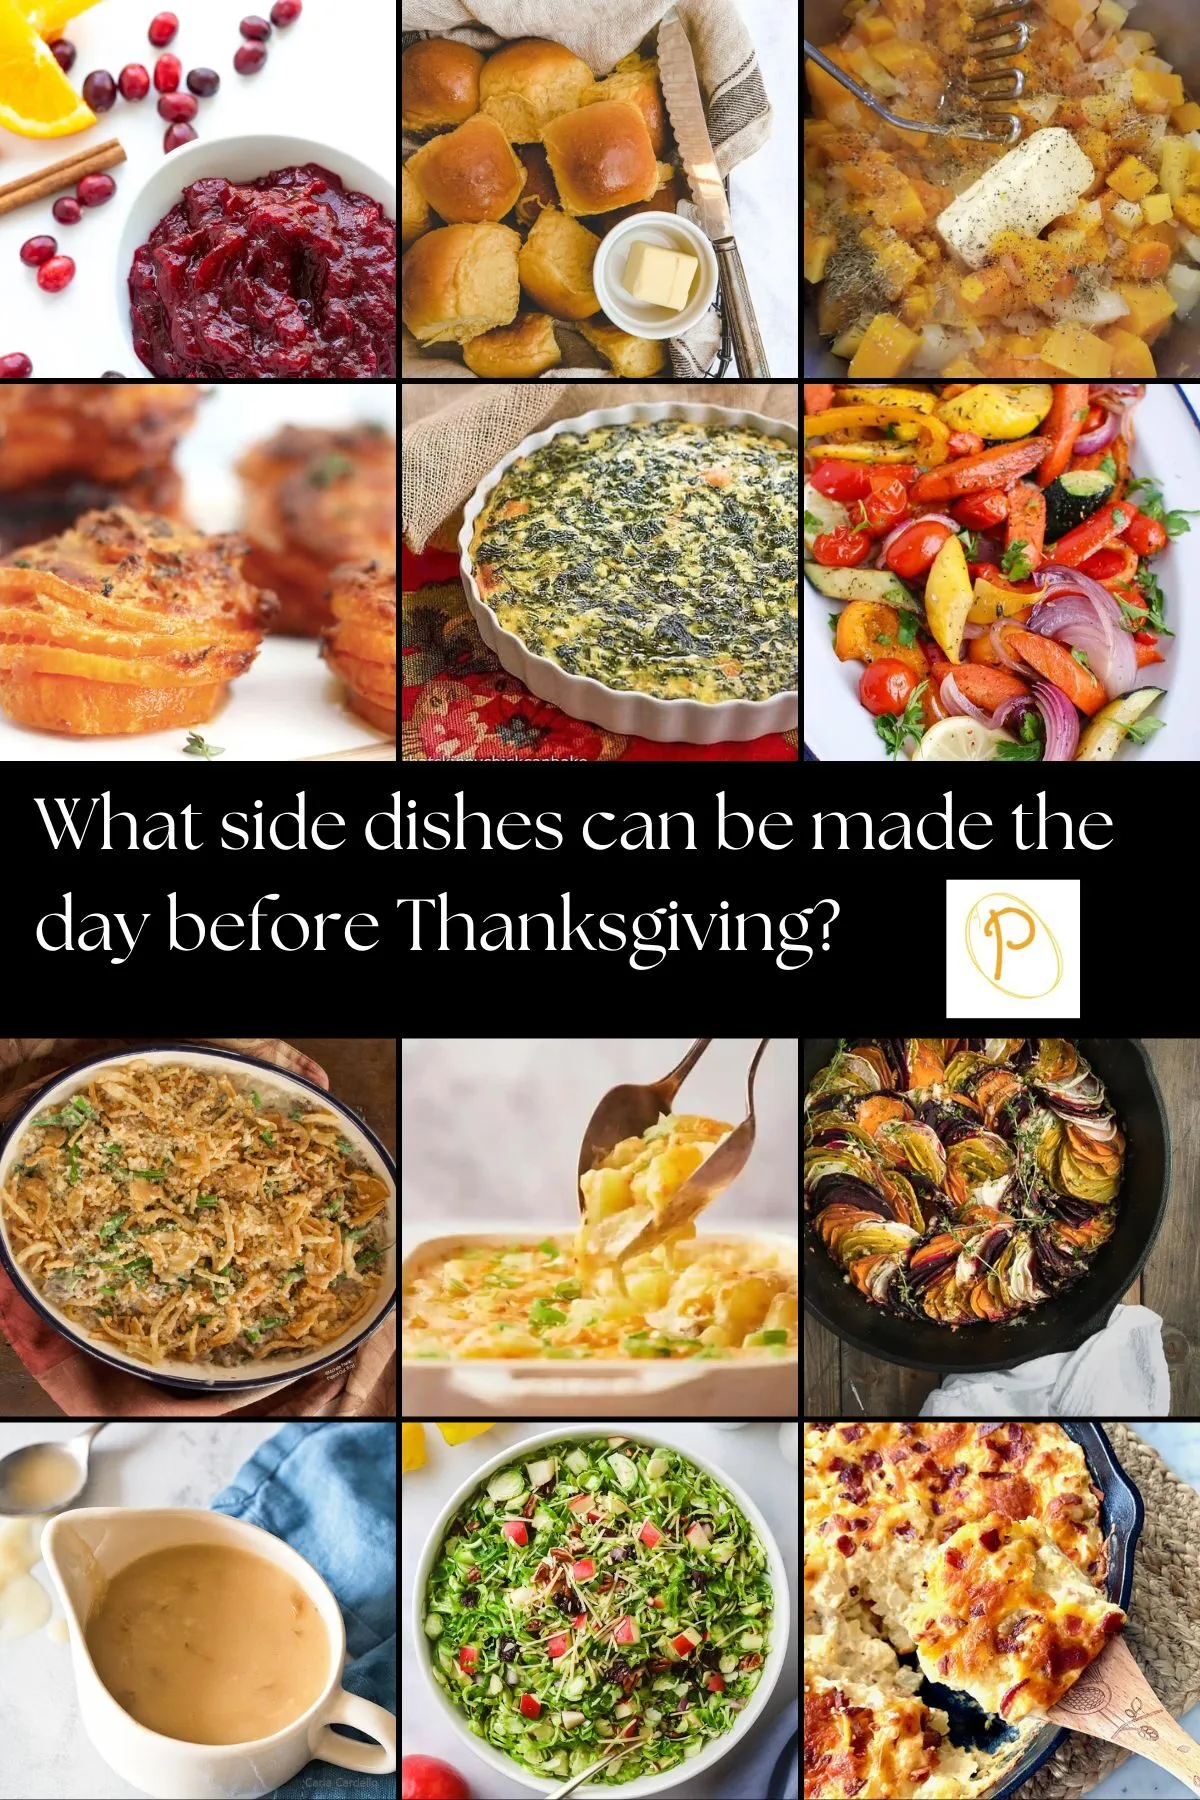 What side dishes can be made the day before Thanksgiving